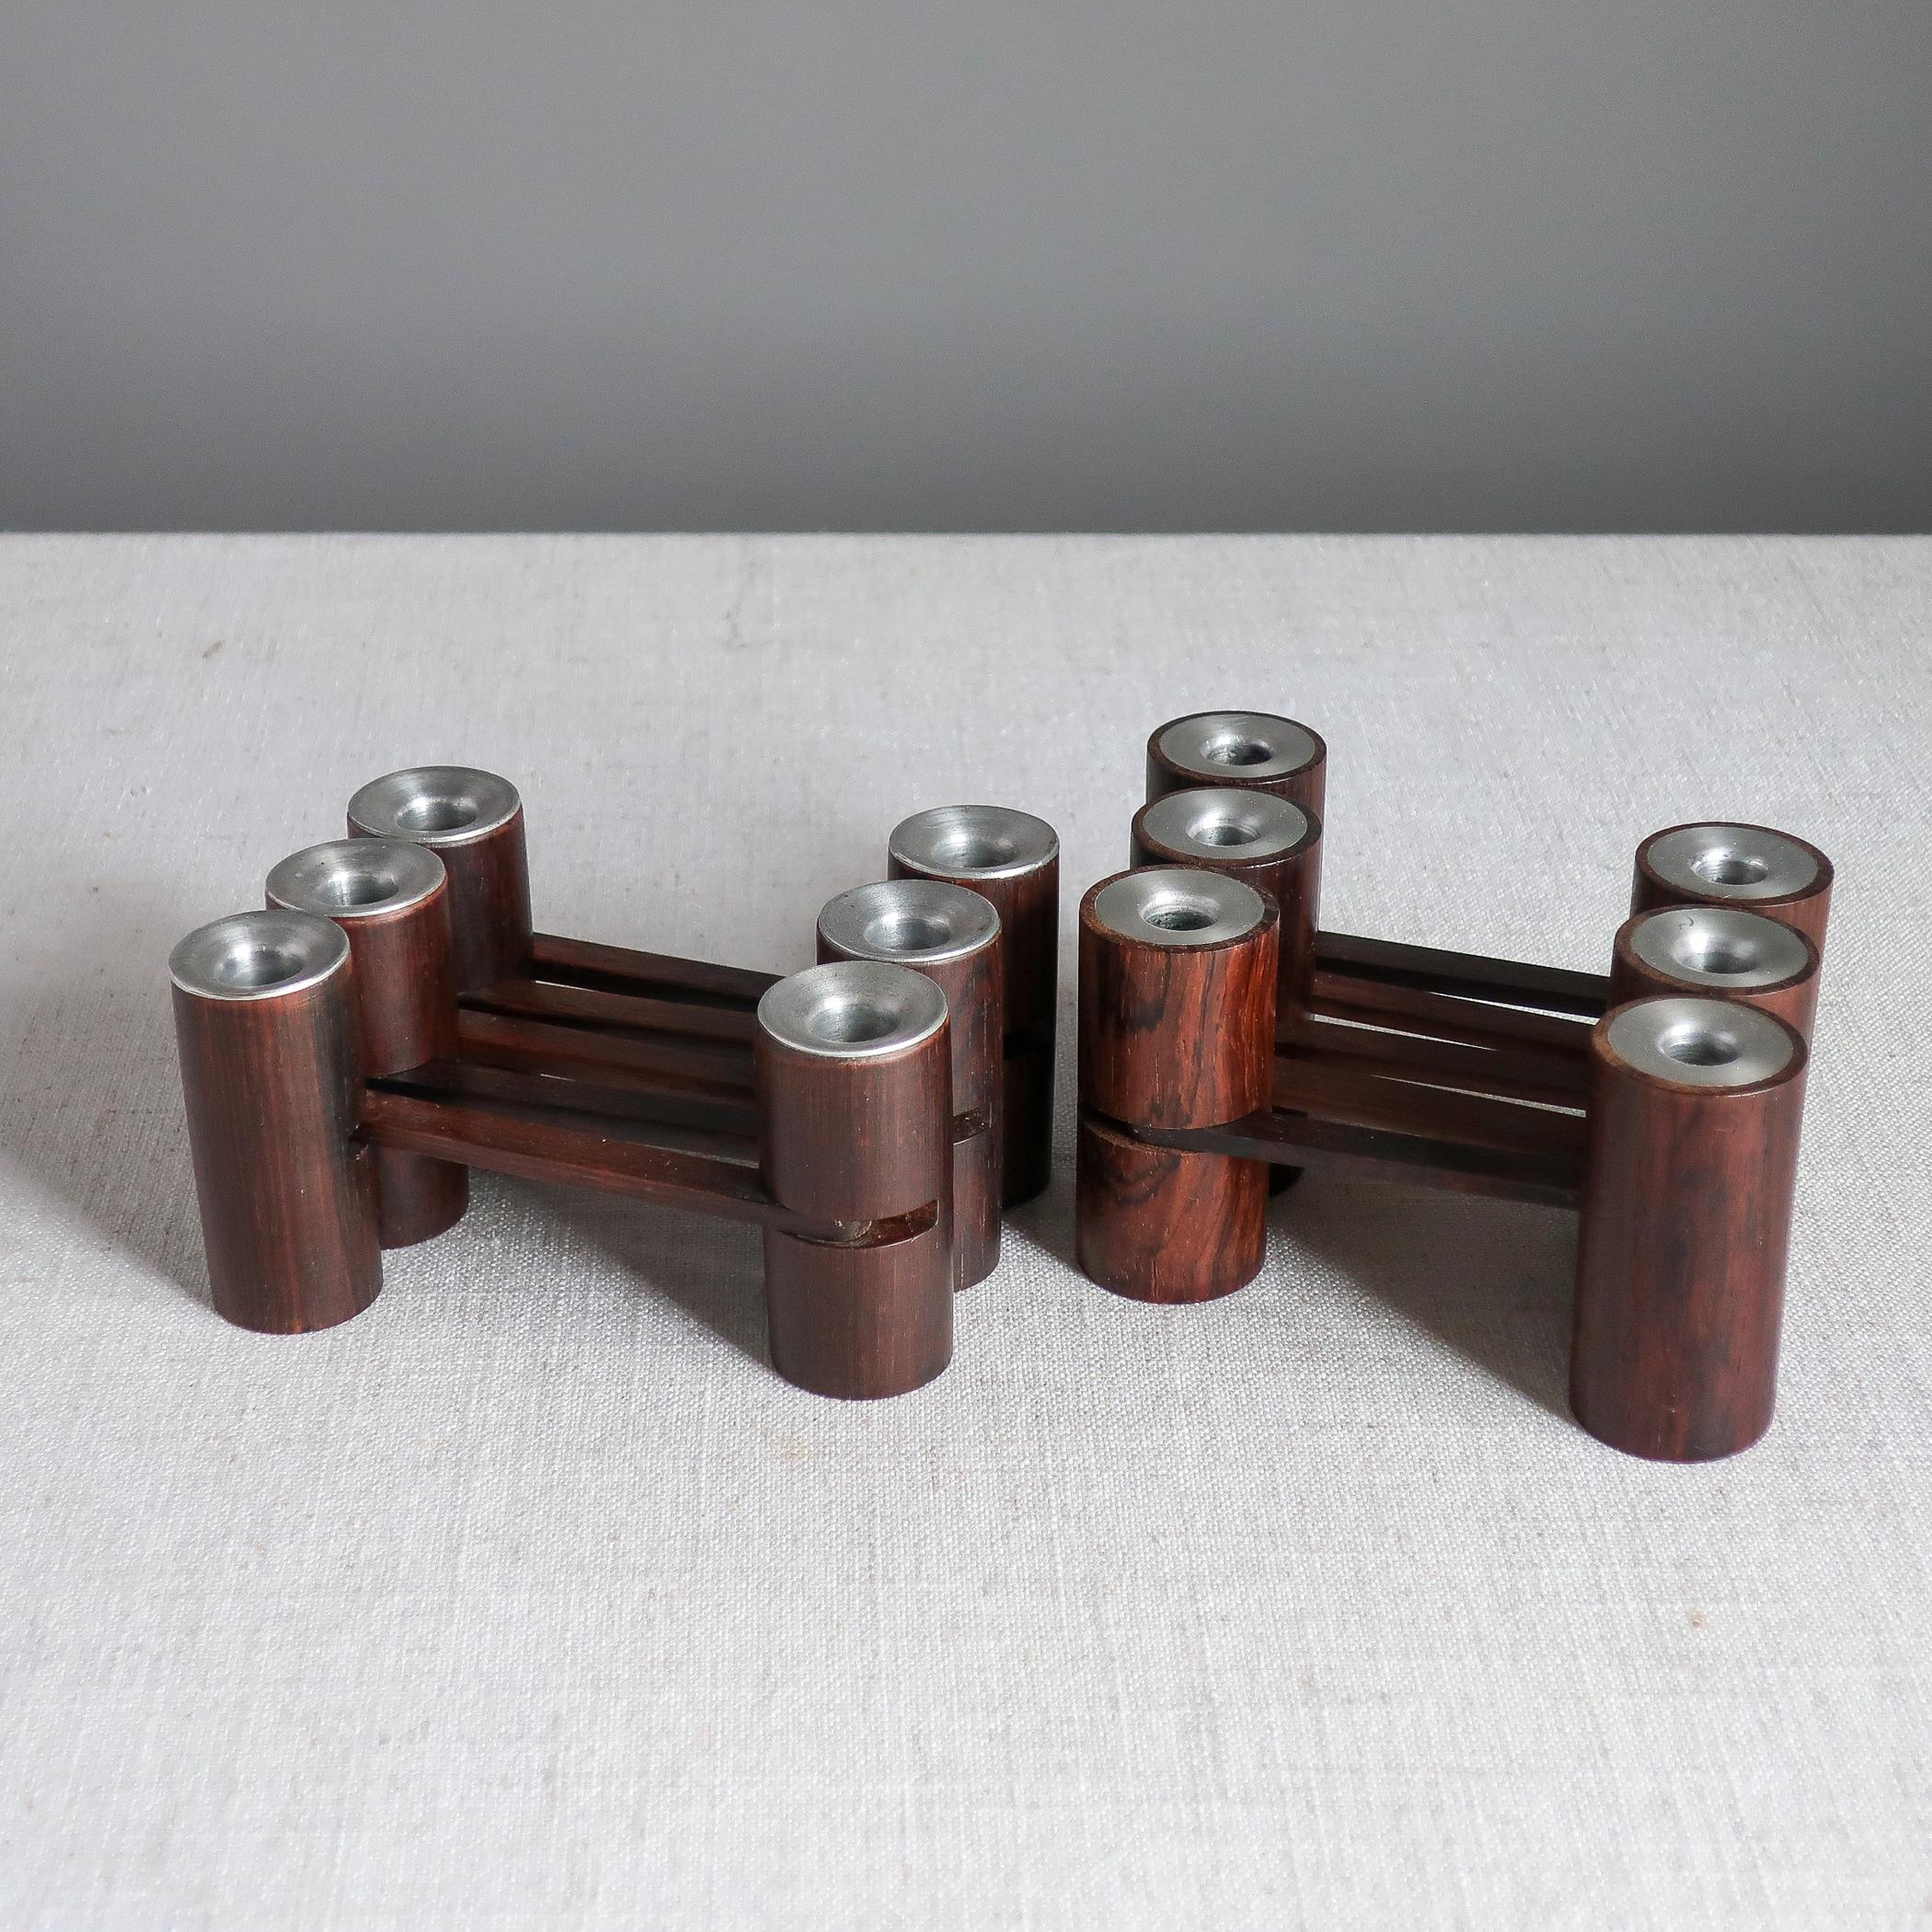 Pair of rosewood and aluminum articulated candelabra by Lauritz Jensen. Made in Denmark, each is comprised of six cylindrical candleholders, jointed so that they can be arranged in any way. Marked with paper label, the LJ mongram, and